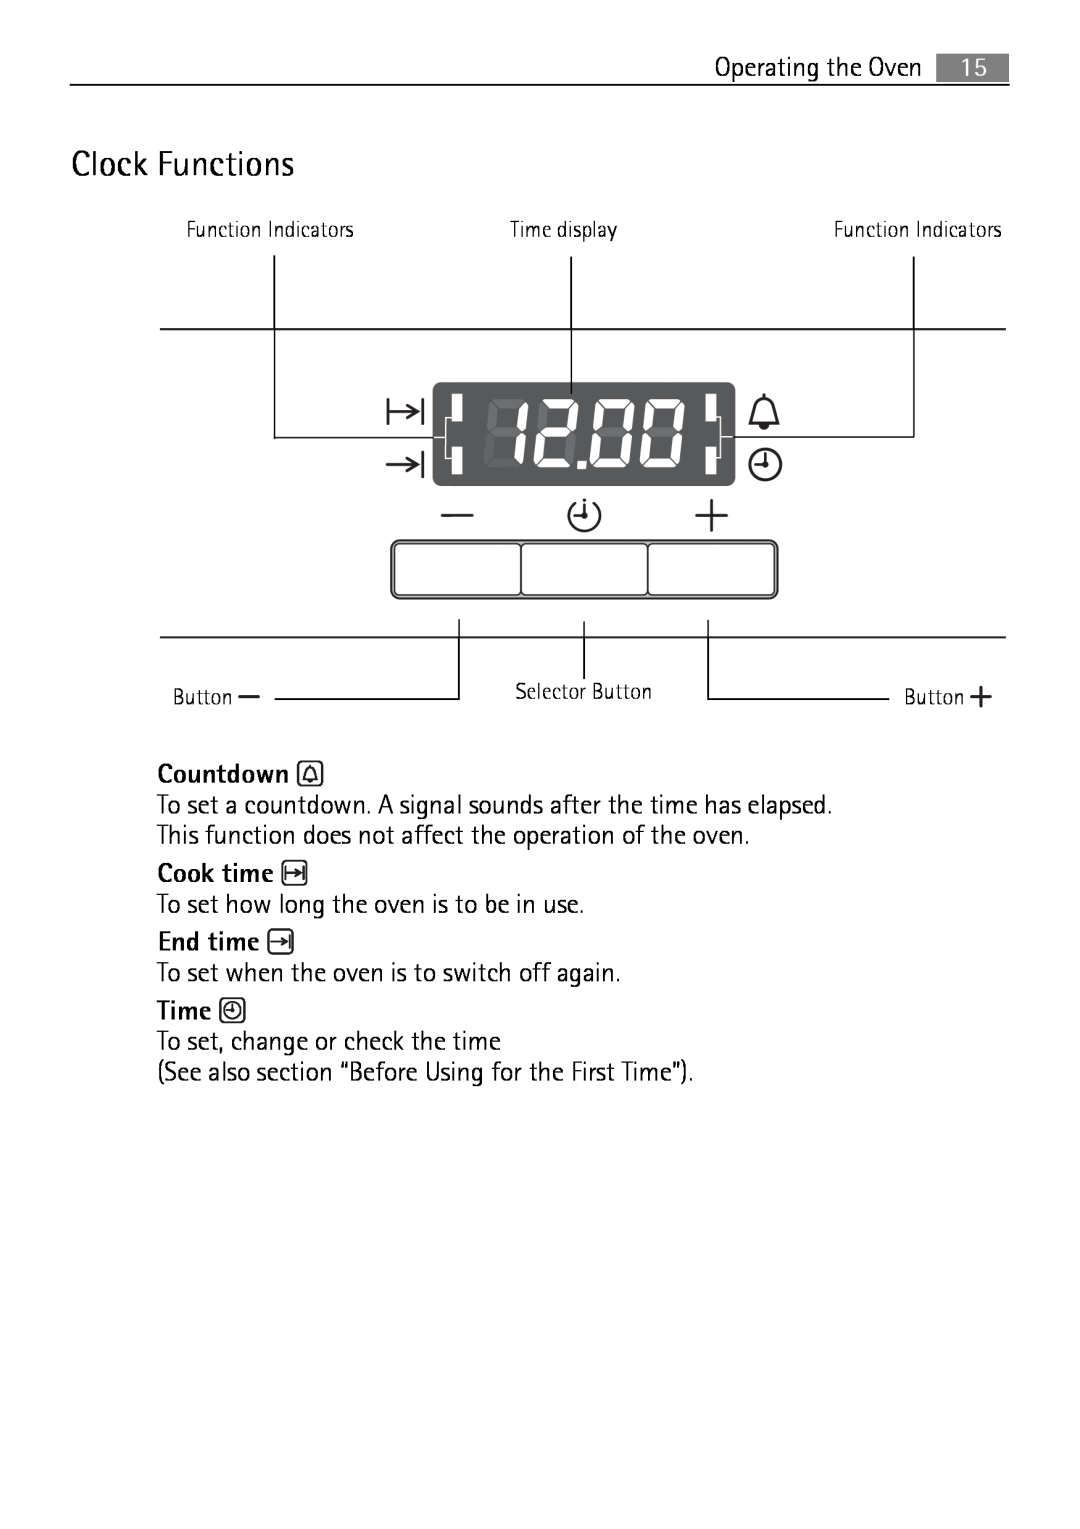 Electrolux B2100-5 user manual Clock Functions, Countdown, Cook time, End time, Time 